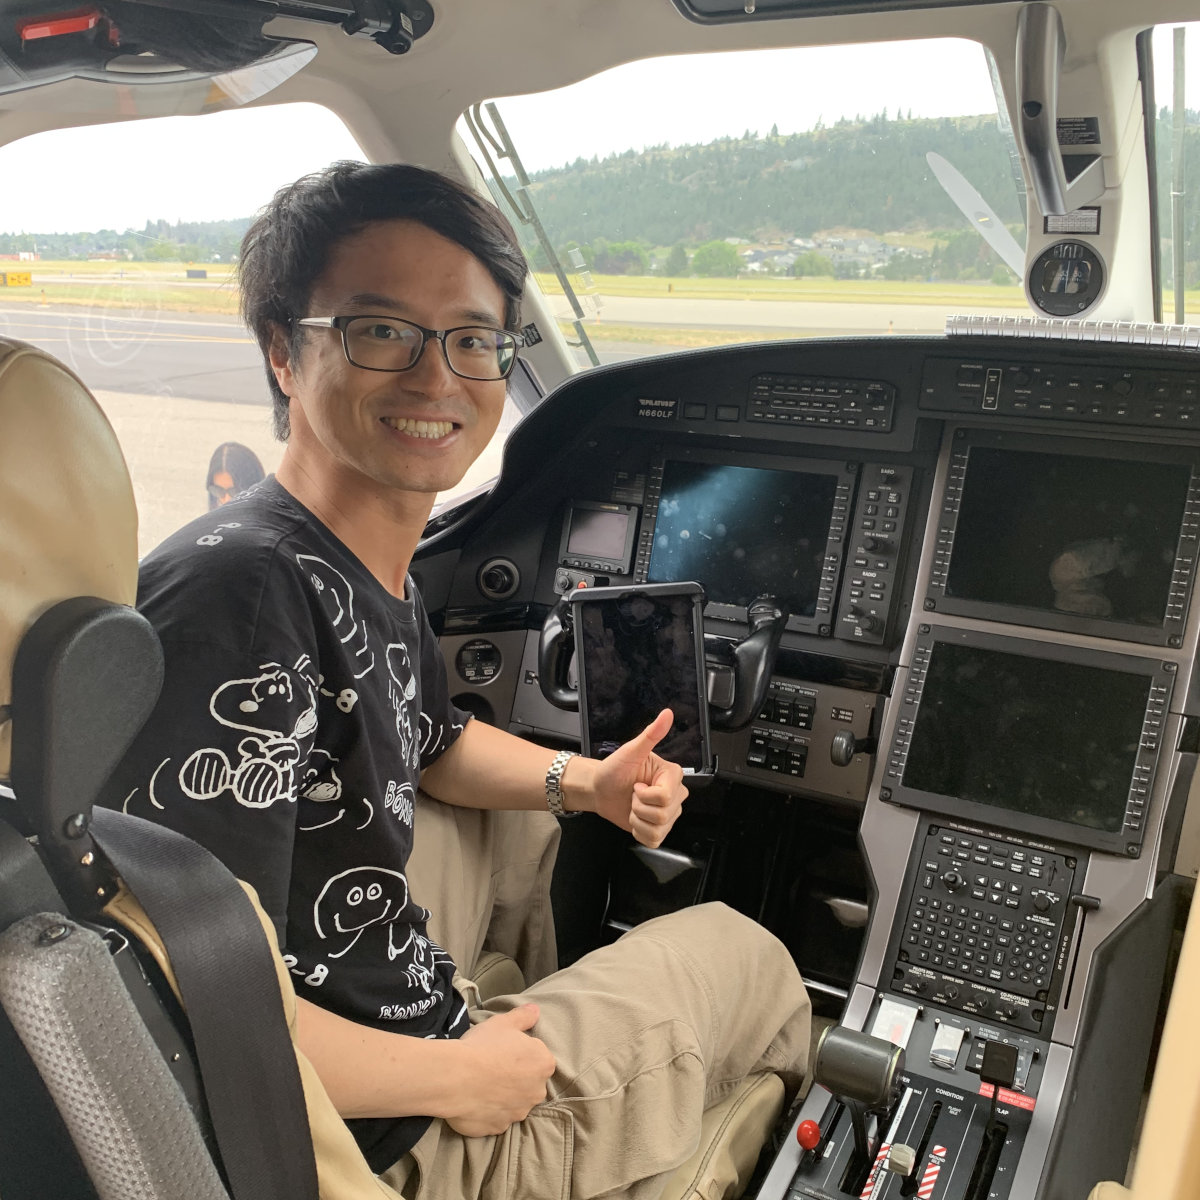 Liang Liang smiles while seated at the front of a helicopter with controls all around.